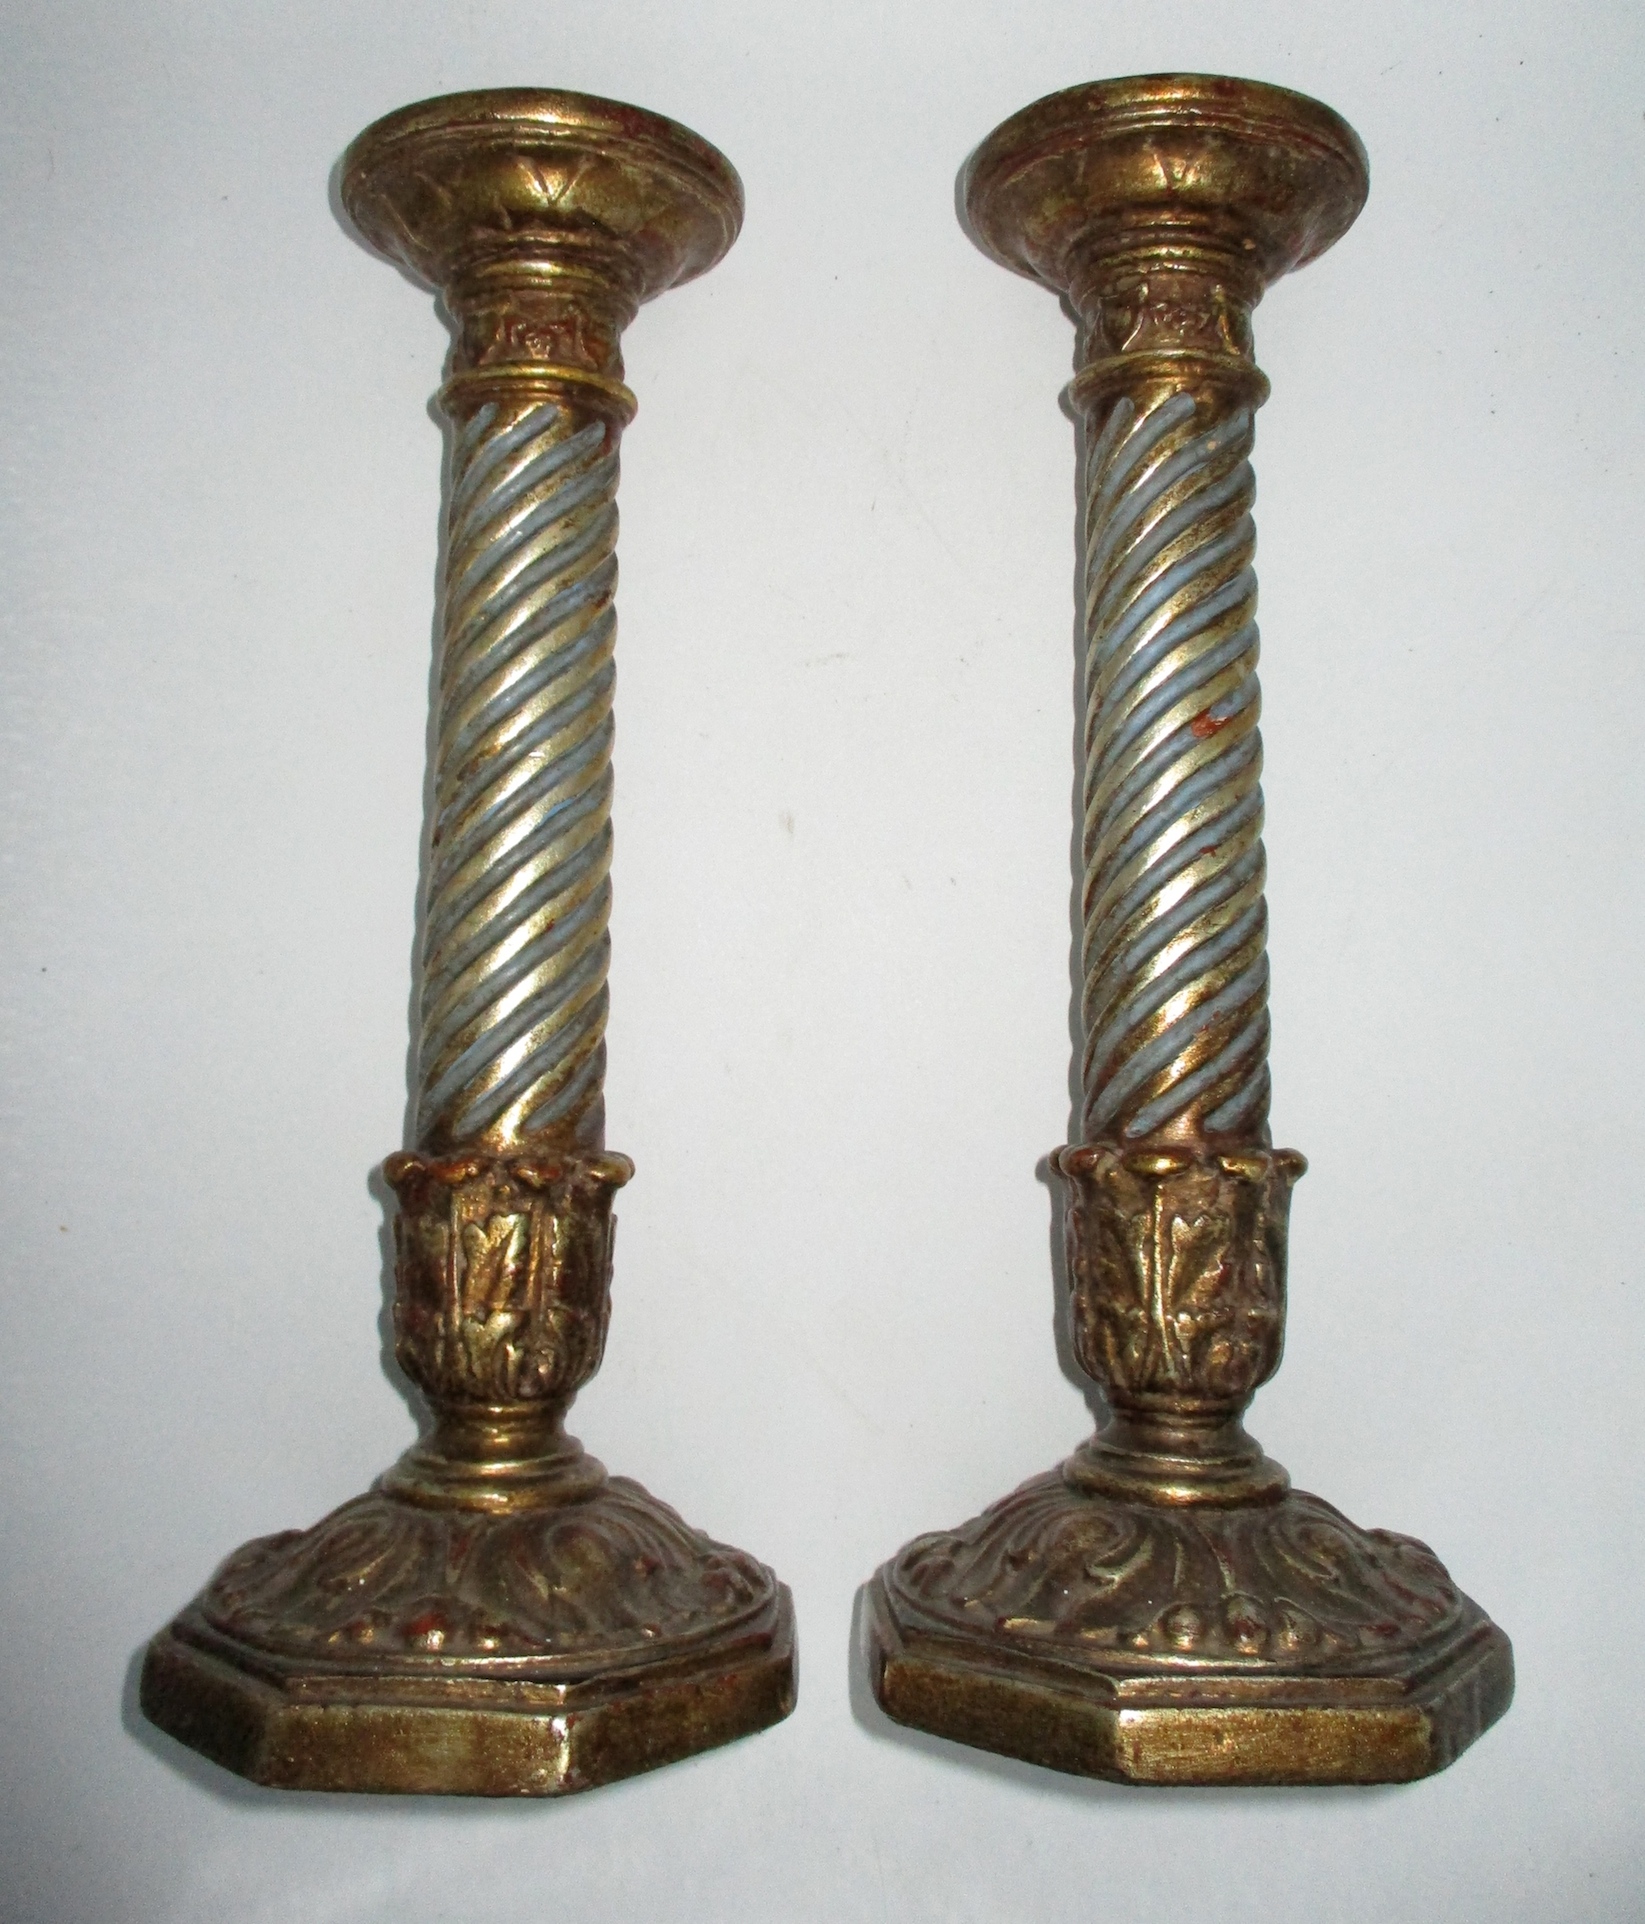 Pair of Borghese Candlesticks (13 1/2" H)